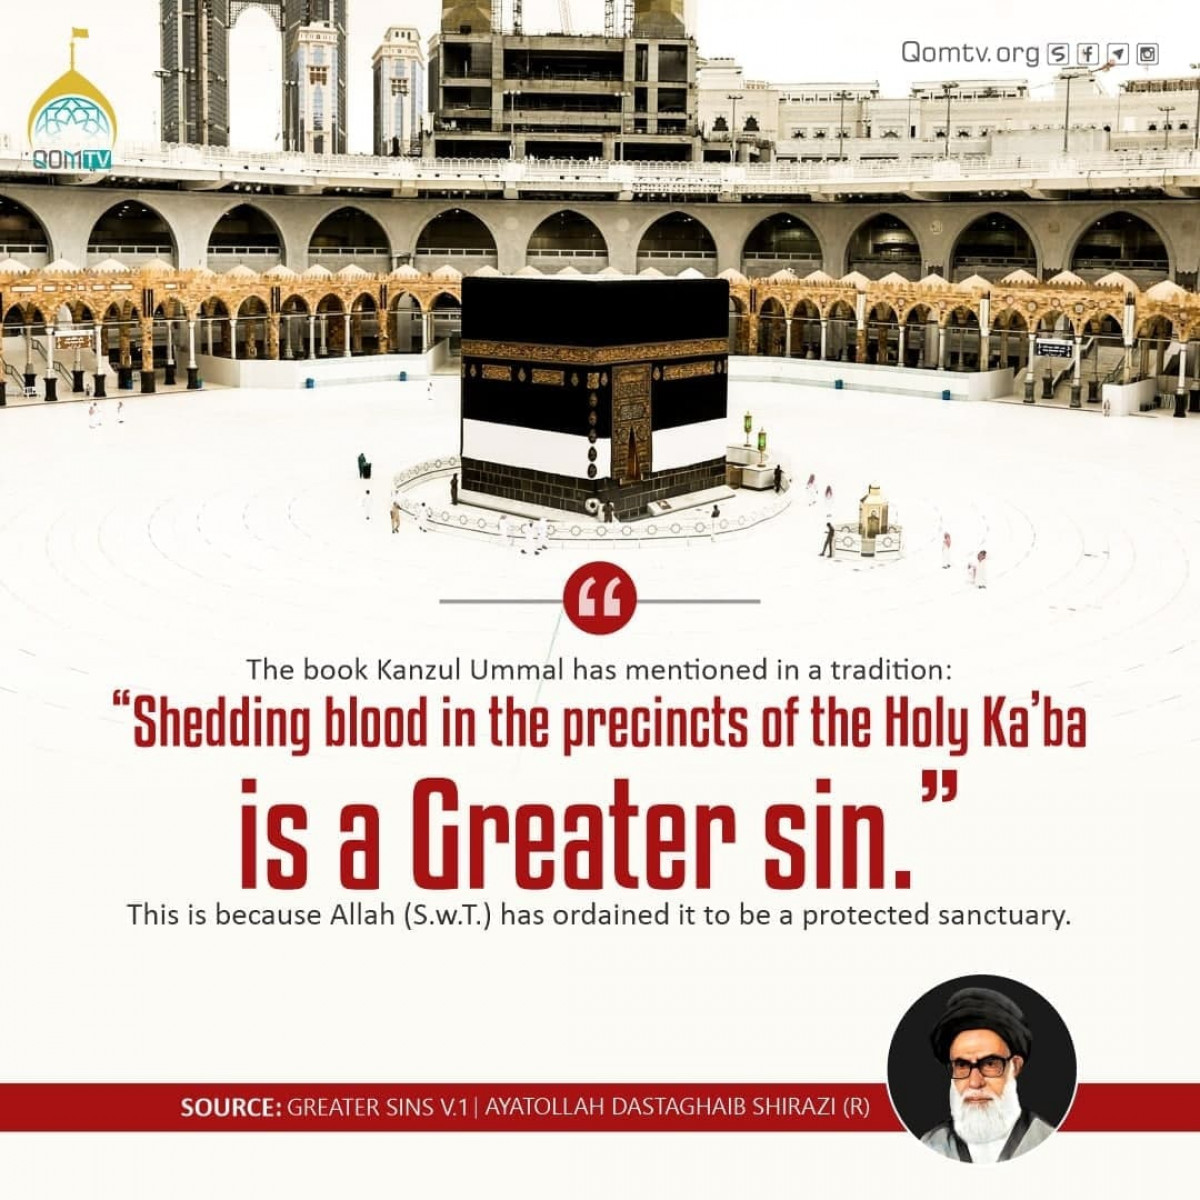 Shedding blood in the precincts of the Holy Ka’ba is a Greater sin